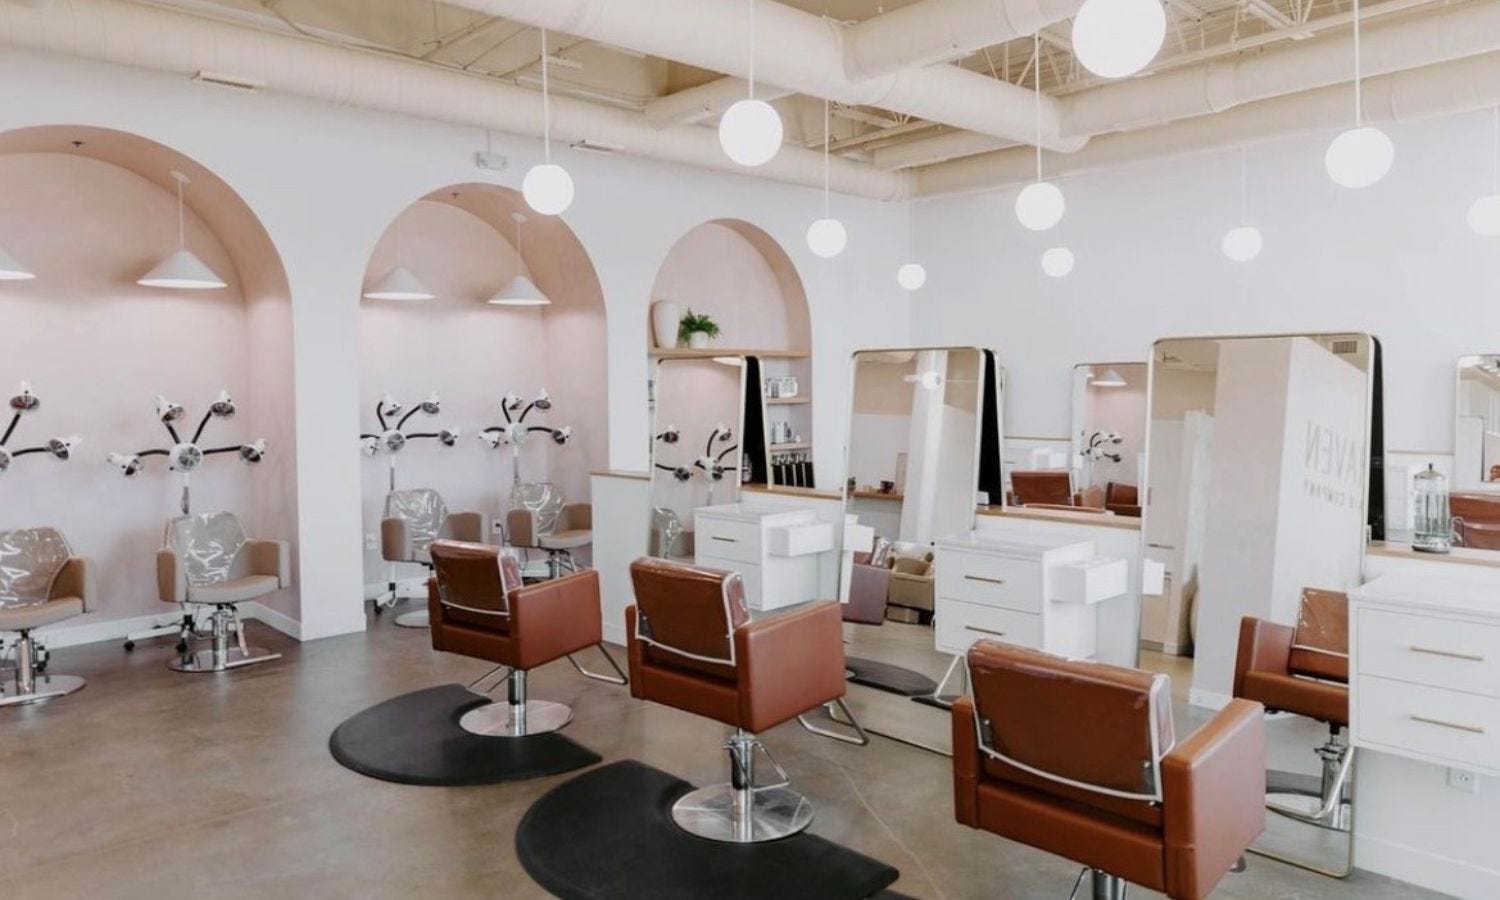 large hair salon with six styling stations and four color processing stations